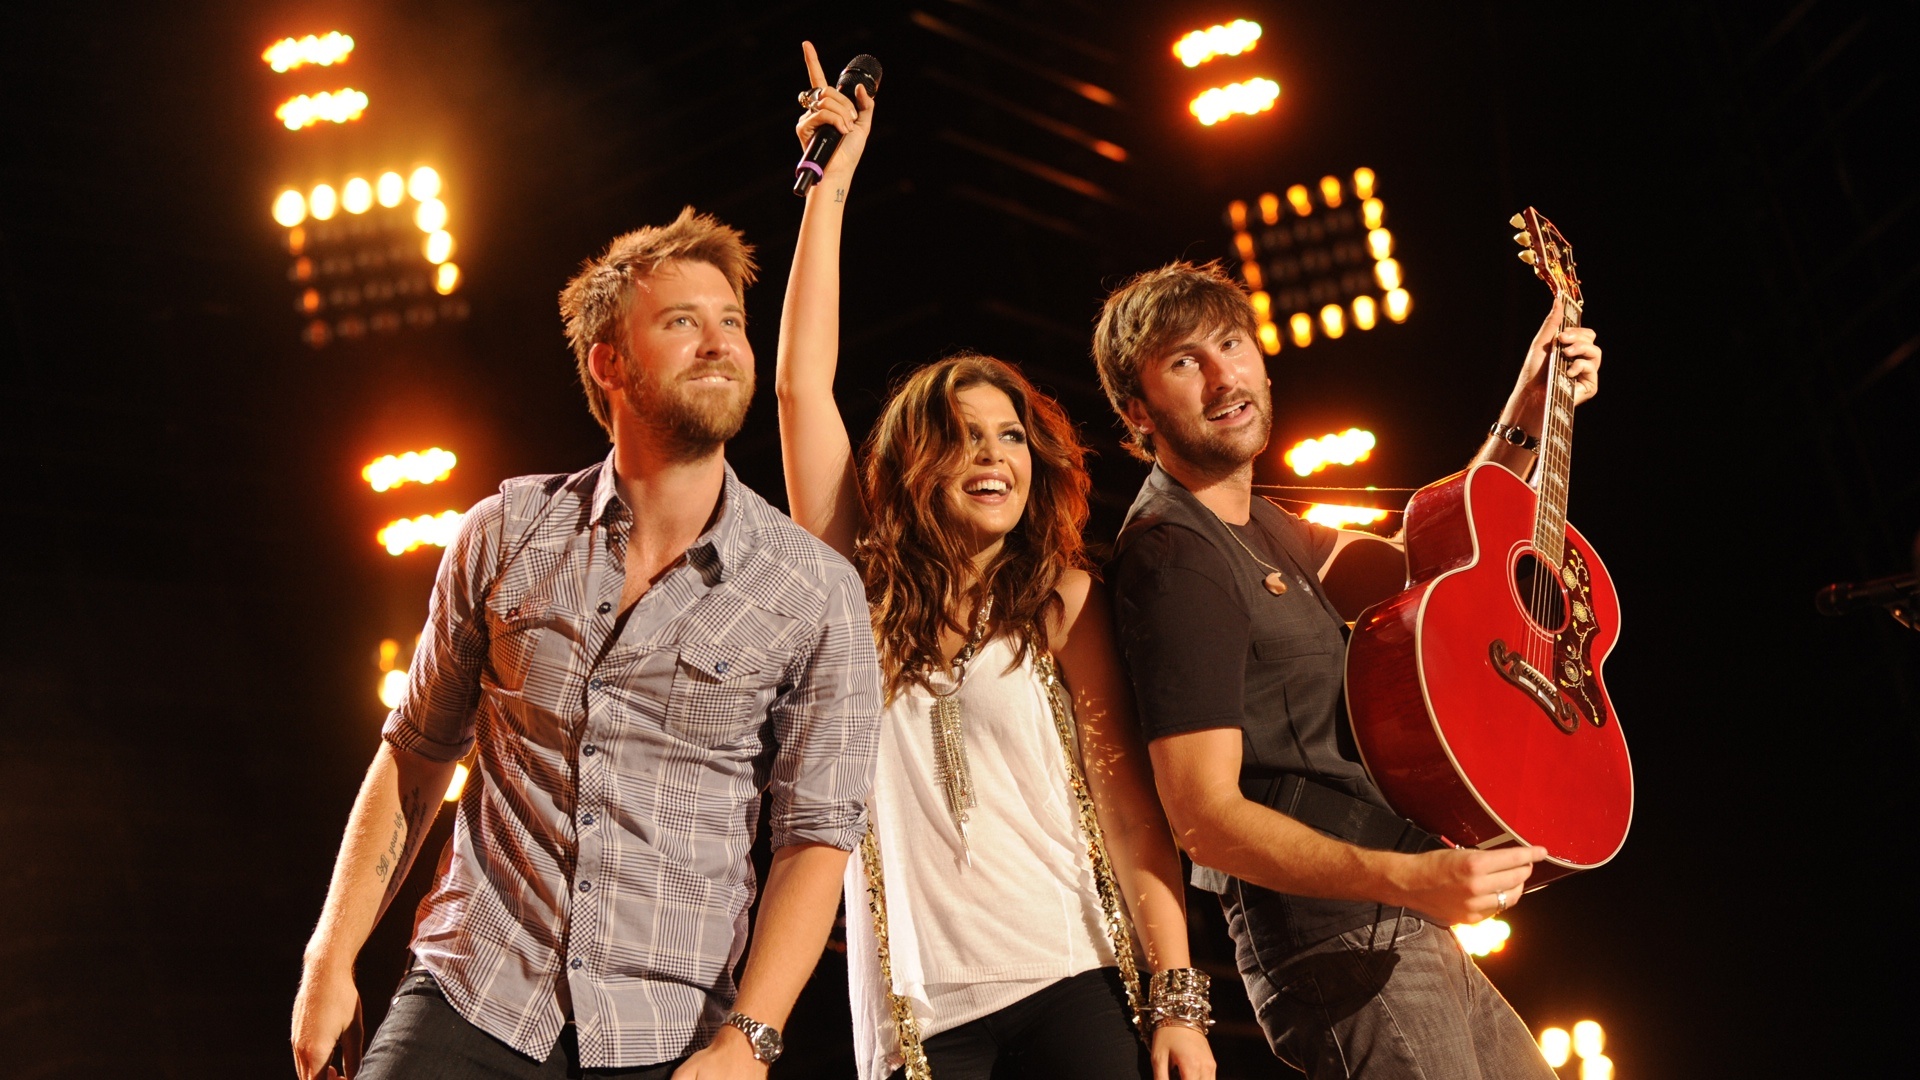 lady, Antebellum, Country, Country pop, Guitar, Concert, Guitars, Concerts Wallpaper